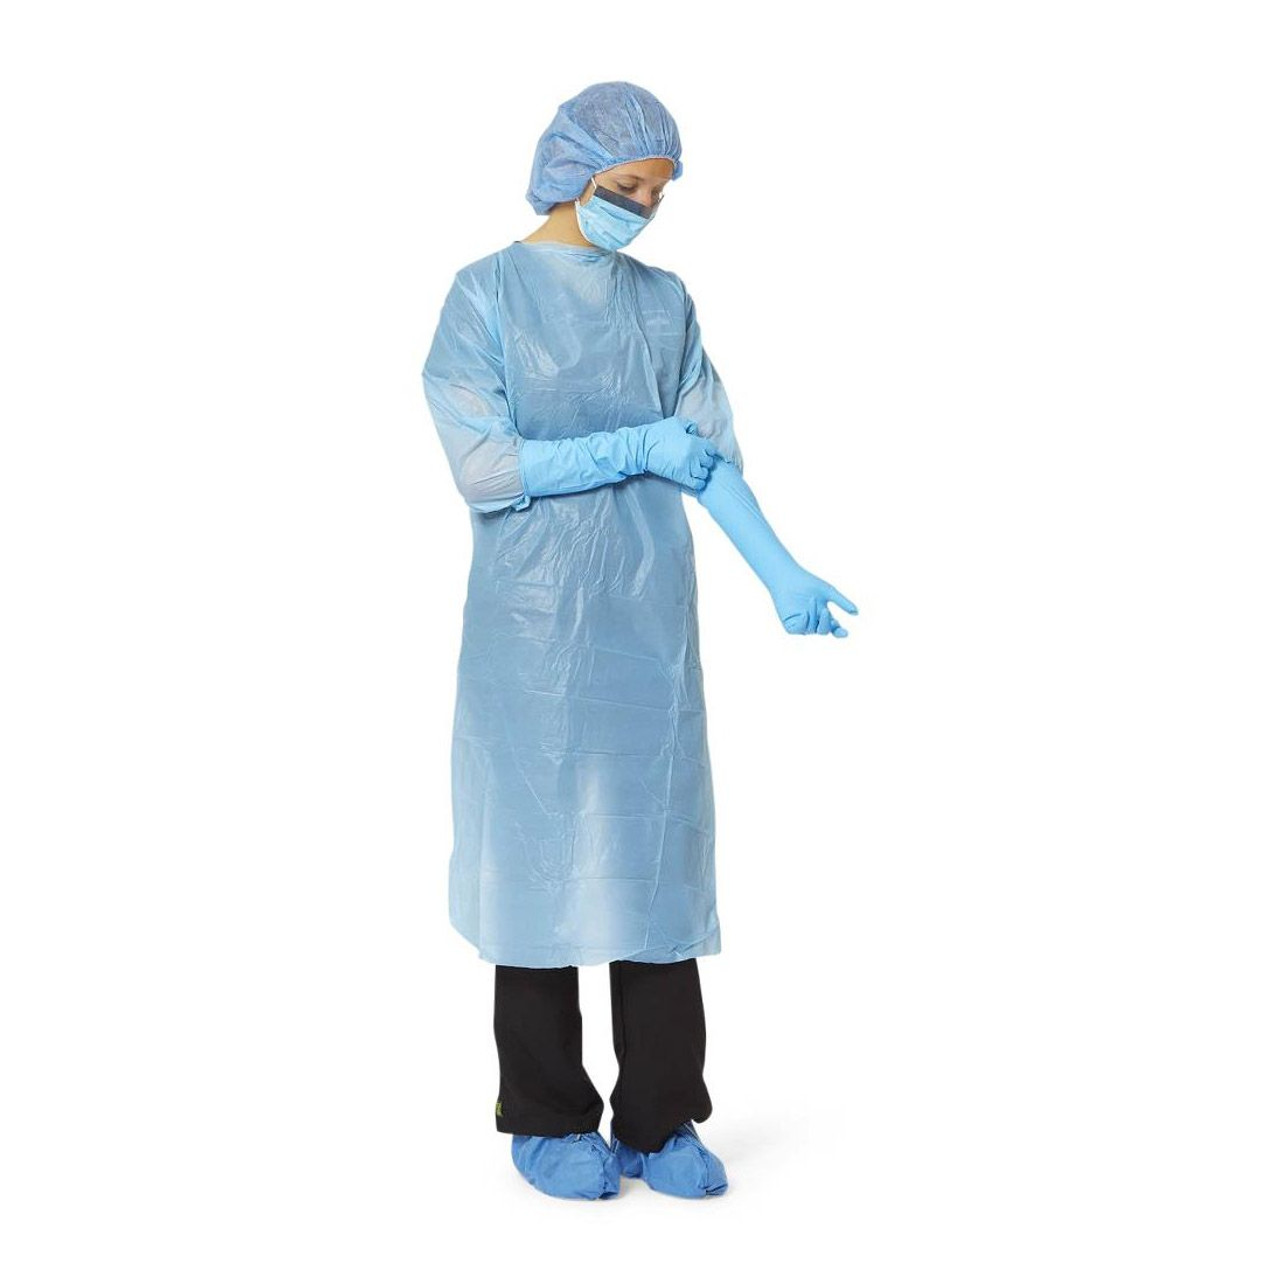 Bowman Protection System Isolation Kit, Double Gown